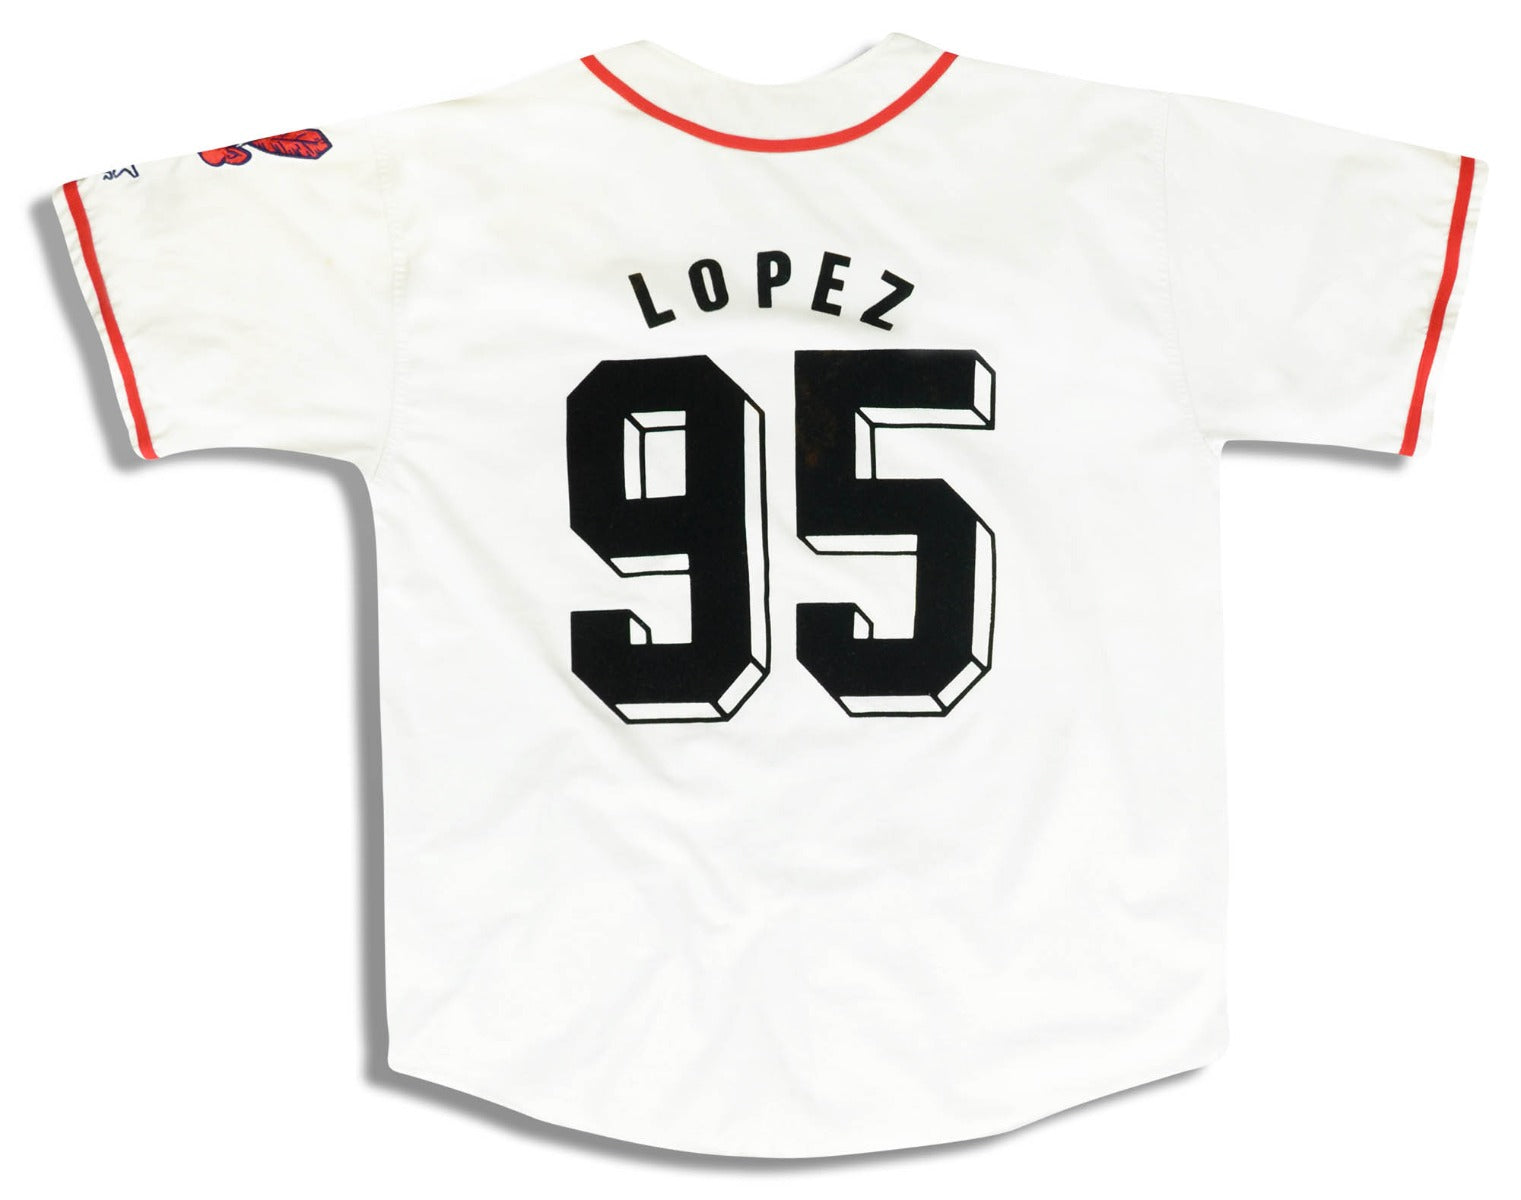 1995 CLEVELAND INDIANS LOPEZ STARTER JERSEY L - Classic American Sports